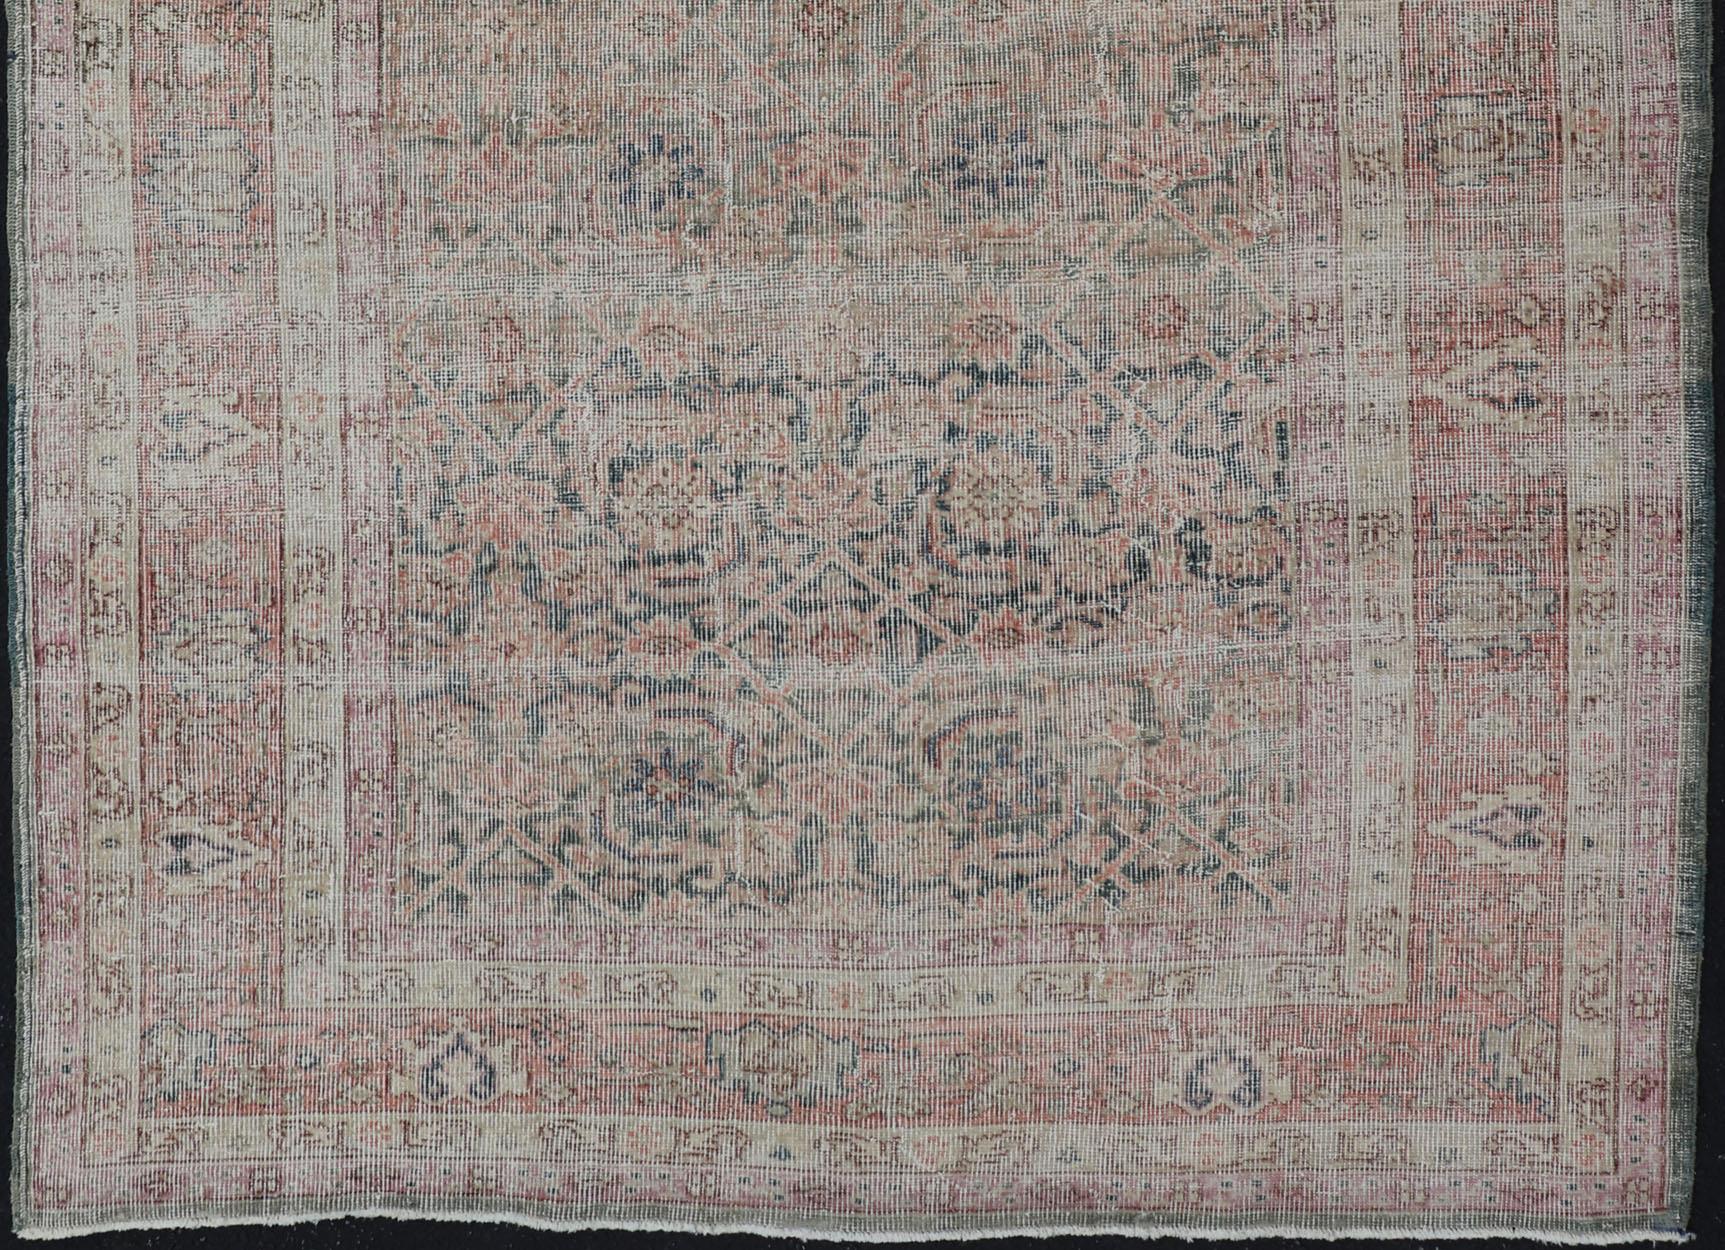 Antique Persian Malayer Rug in Variegated Gray-Blue, Cream and Soft Pink For Sale 3